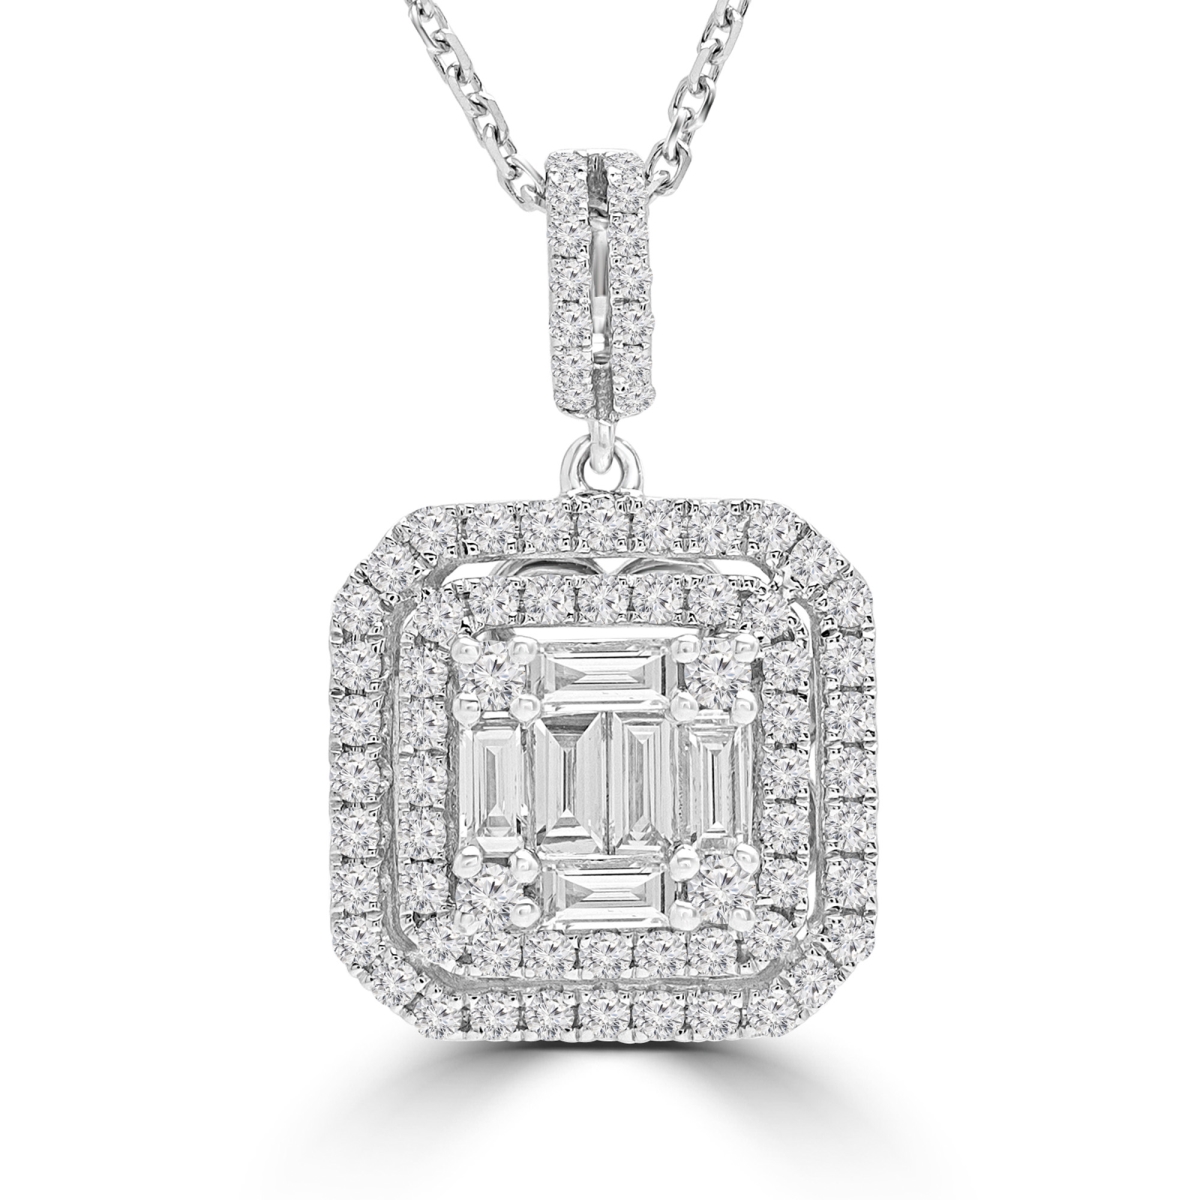 Md190305 0.9 Ctw Baguette Diamond Cluster Double Cushion Halo Pendant Necklace In 18k White Gold